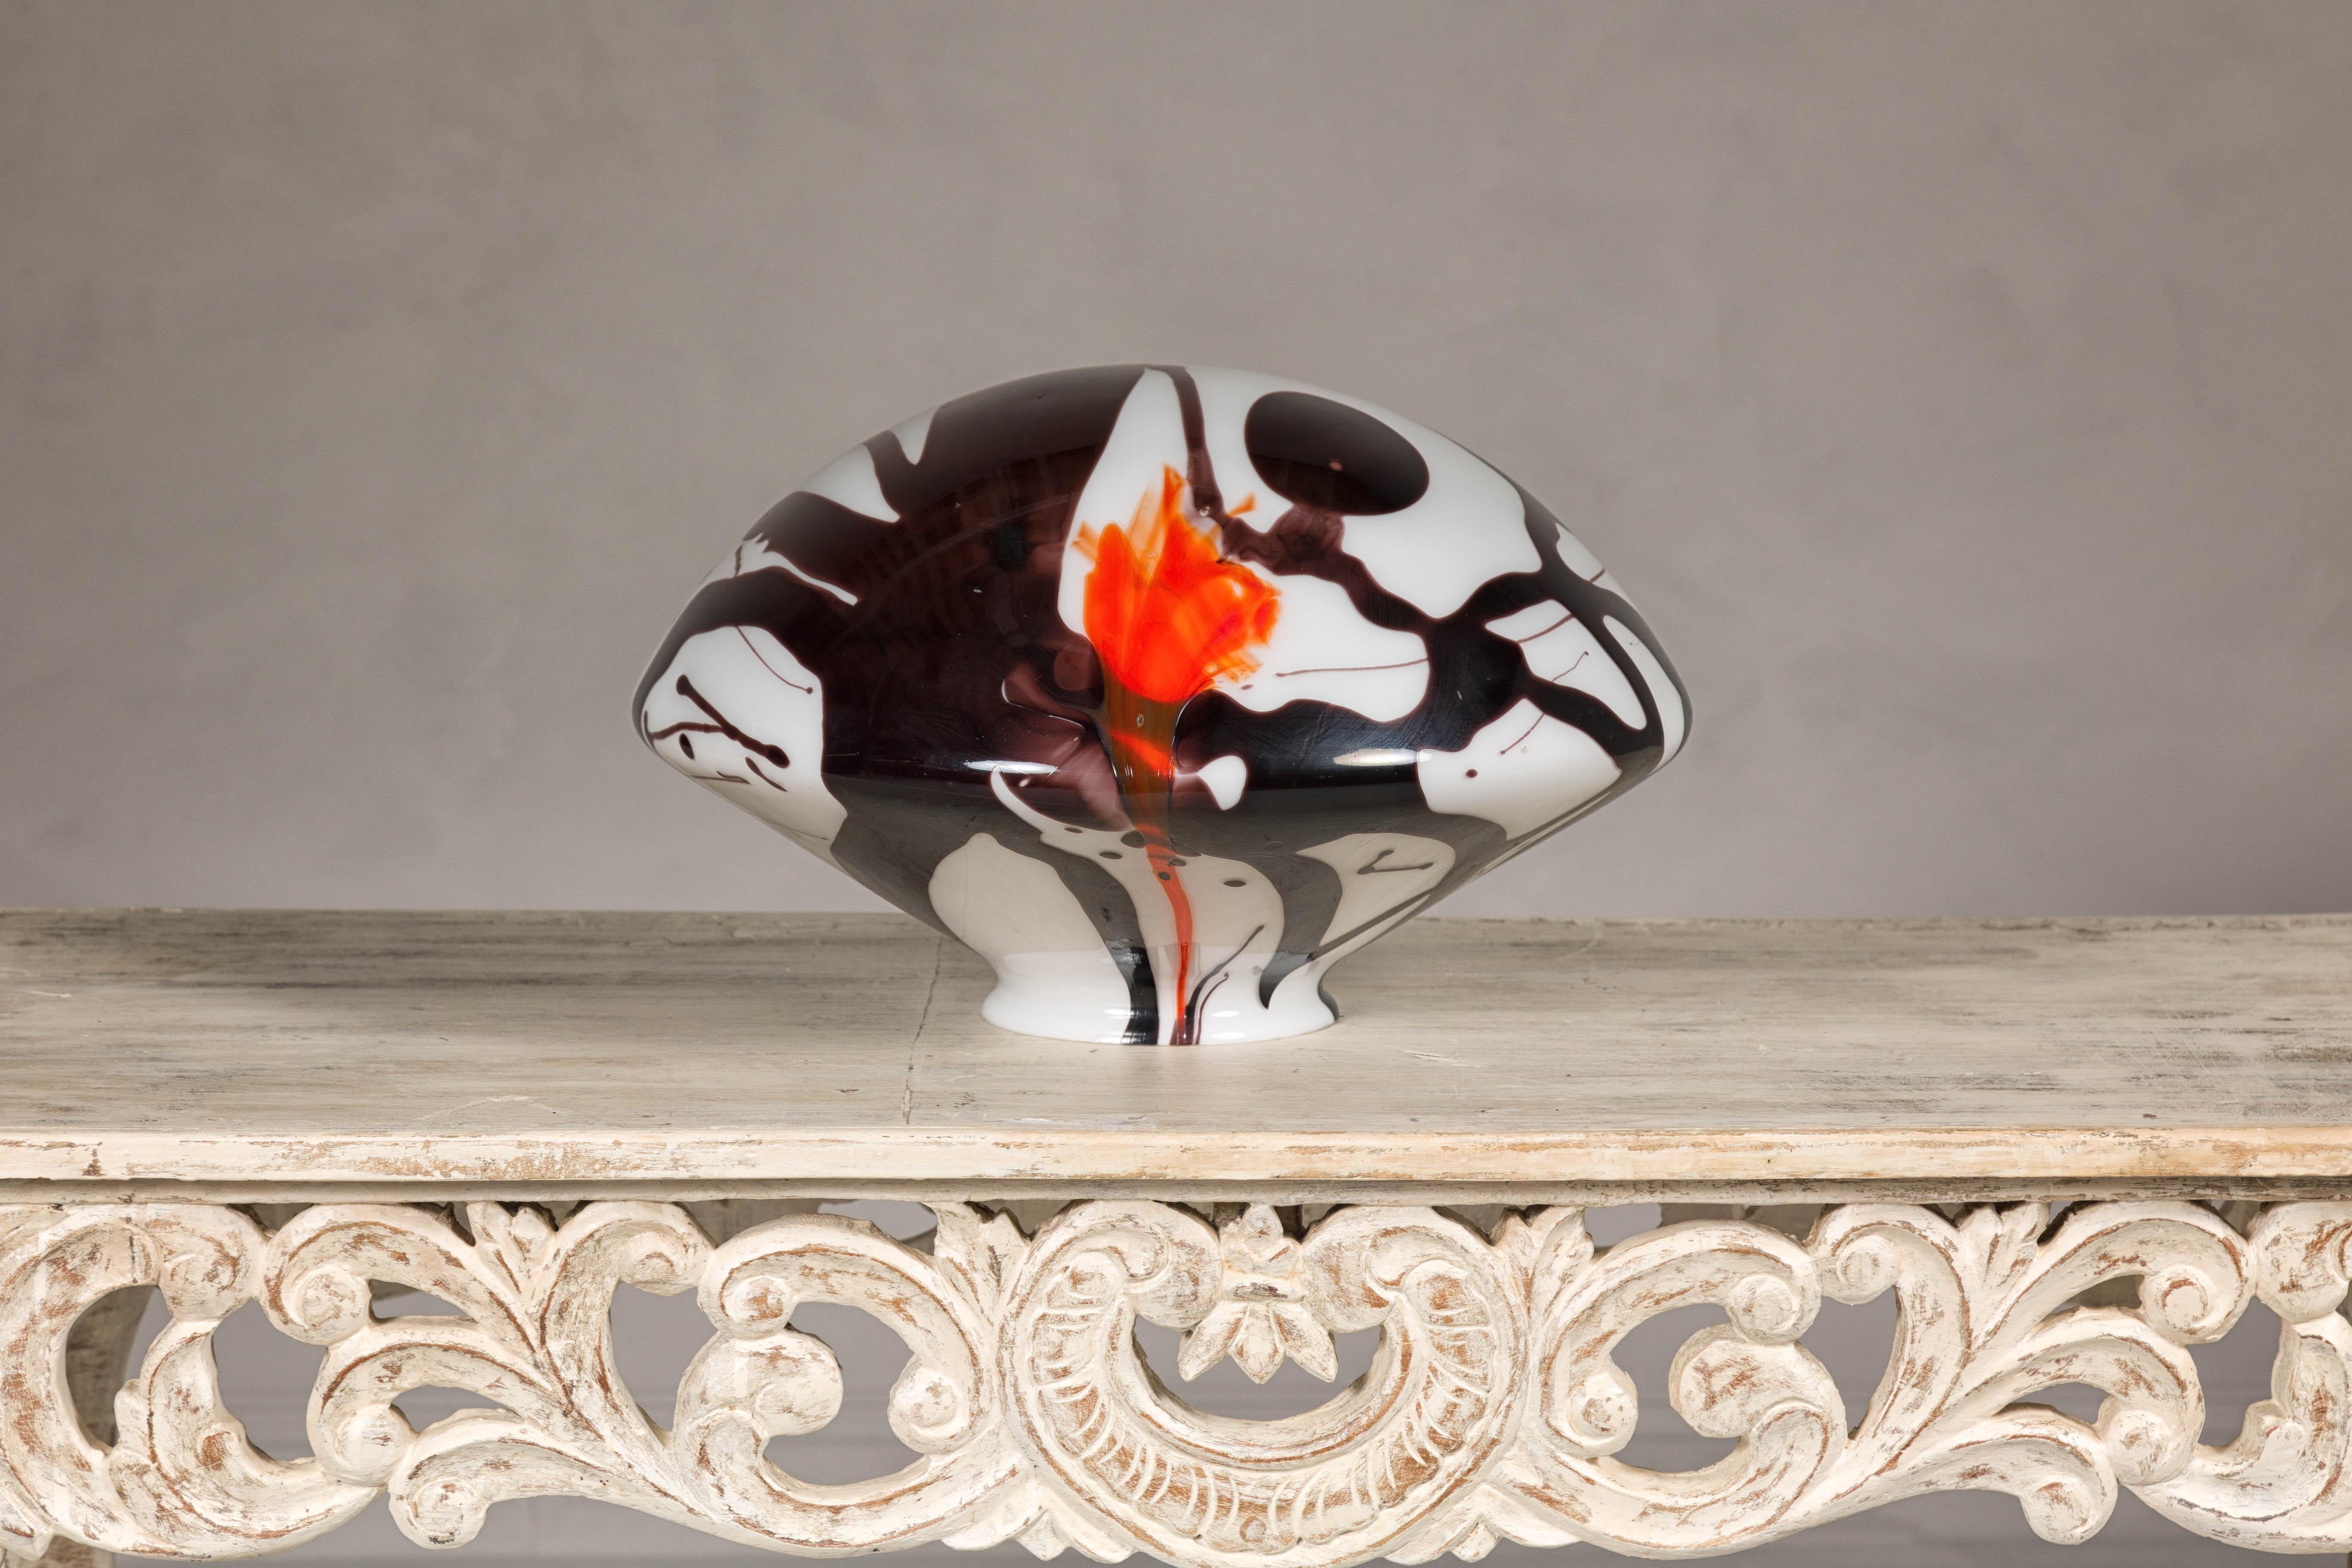 A Midcentury blown glass dome with black, white and orange abstract décor. This midcentury blown glass dome captivates with its swirling abstract décor, where black, white, and vibrant orange hues dance together in a harmonious blend of color and